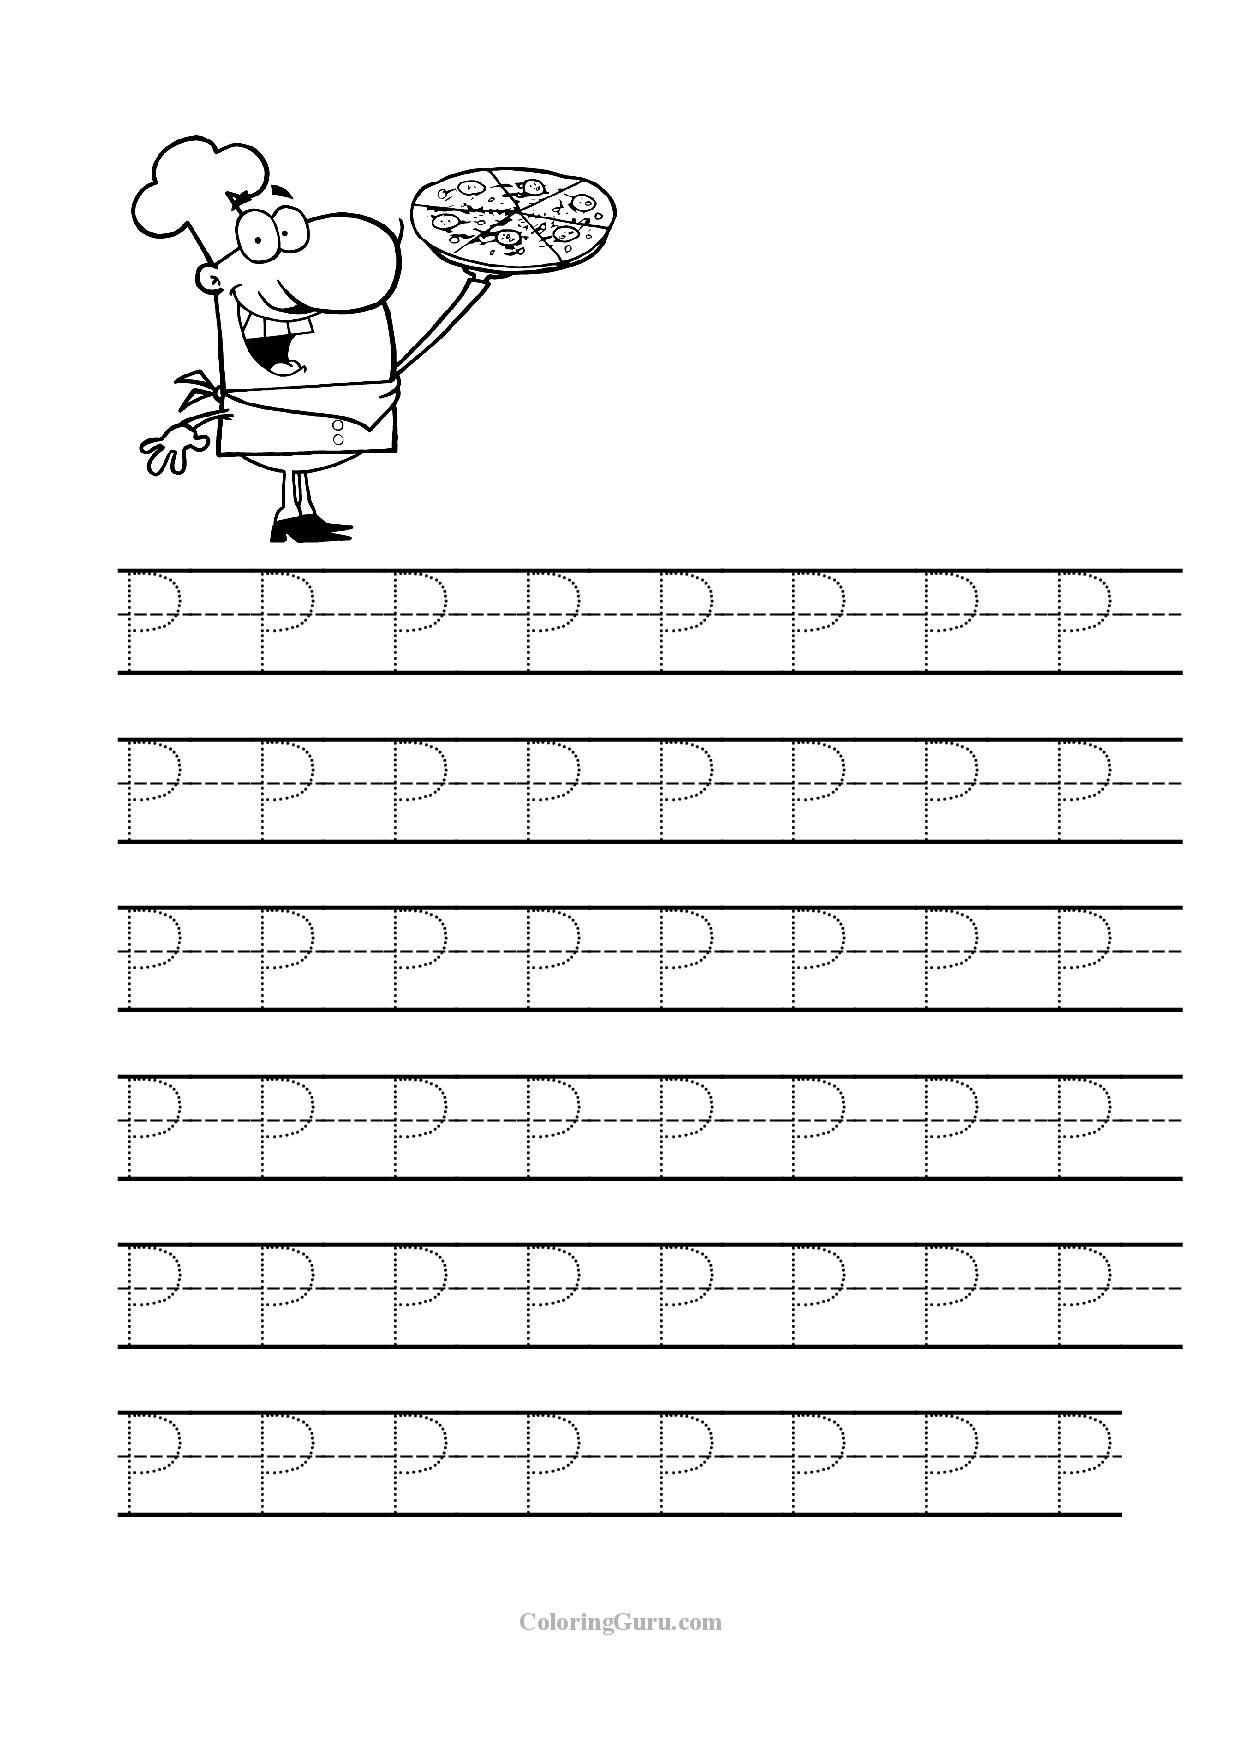 Free Printable Tracing Letter P Worksheets For Preschool | Tracing - Free Printable Preschool Worksheets Tracing Letters